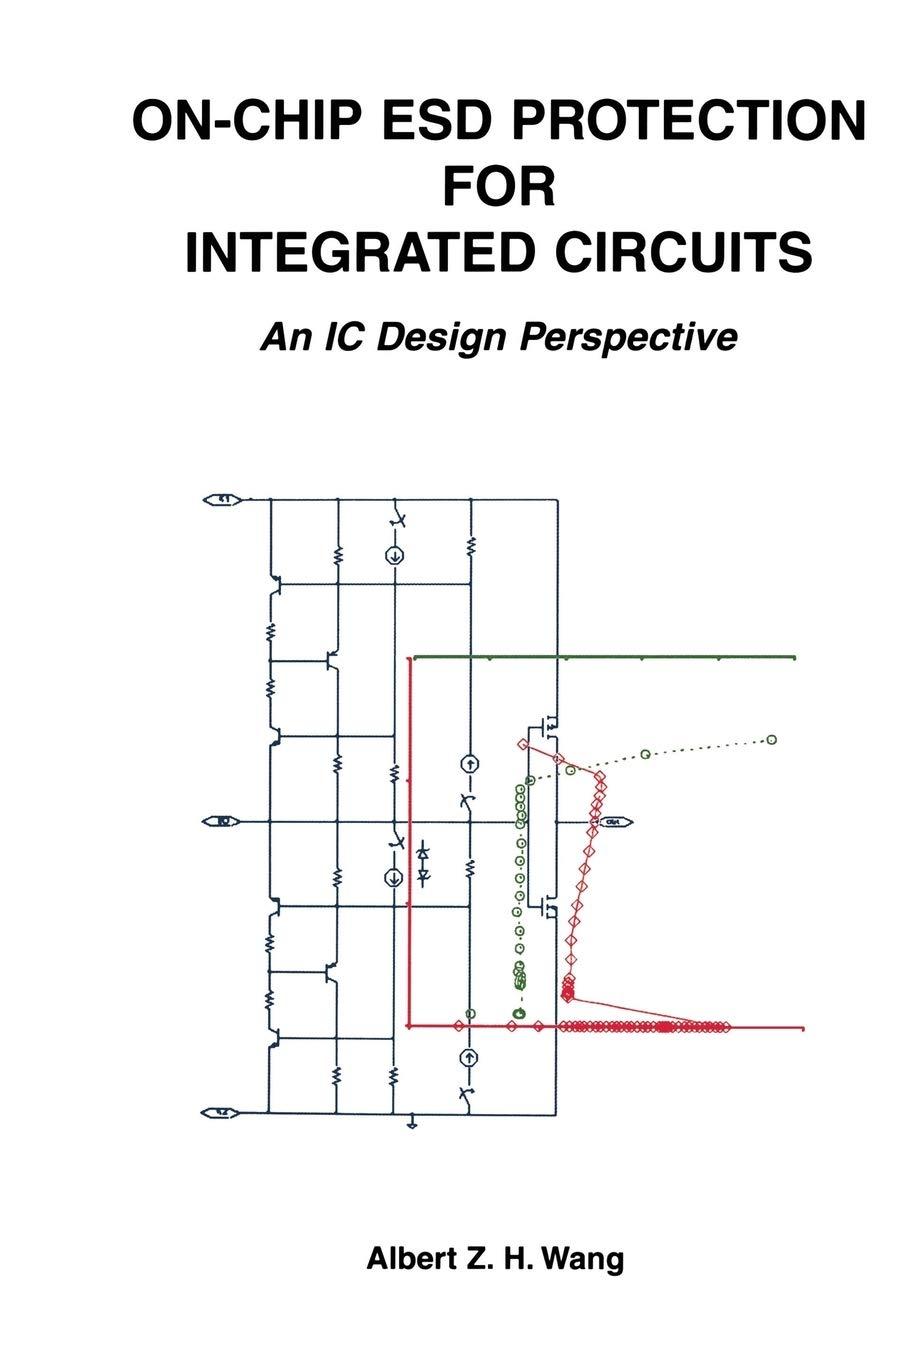 on chip esd protection for integrated circuits 2002 edition albert z.h. wang 1475775741, 978-1475775747